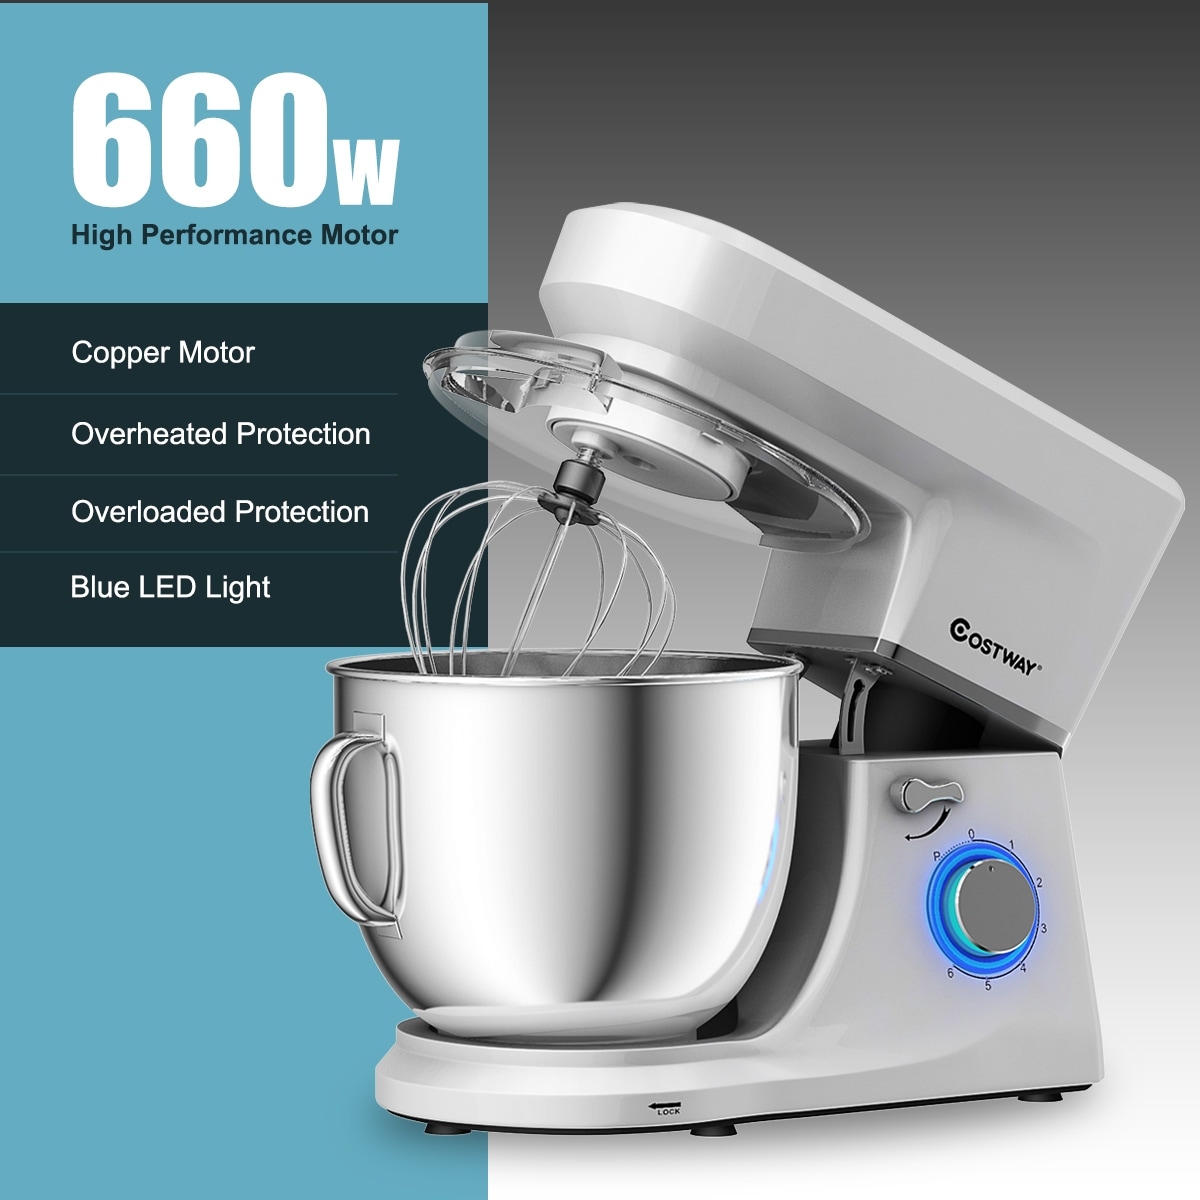 https://ak1.ostkcdn.com/images/products/is/images/direct/d46010b6927c94aa0e082e1bfb39980aad2e0281/Tilt-Head-Stand-Mixer-7.5-Qt-6-Speed-660W-with-Dough-Hook%2C-Whisk-%26-Beater.jpg